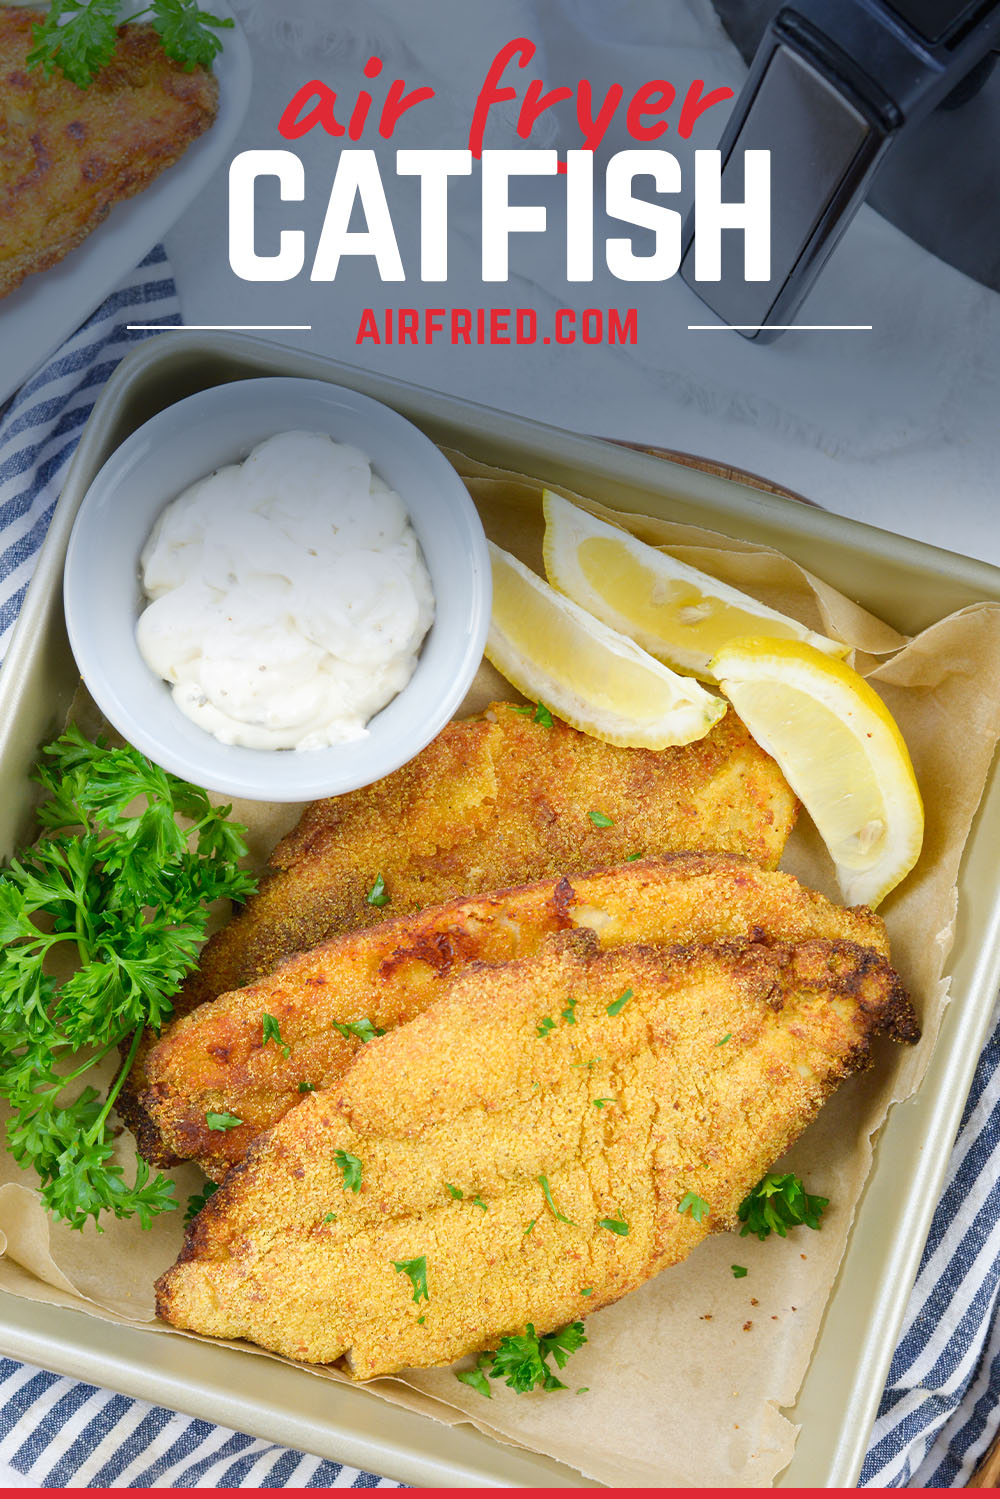 Catfish and lemon wedges on a square plate.